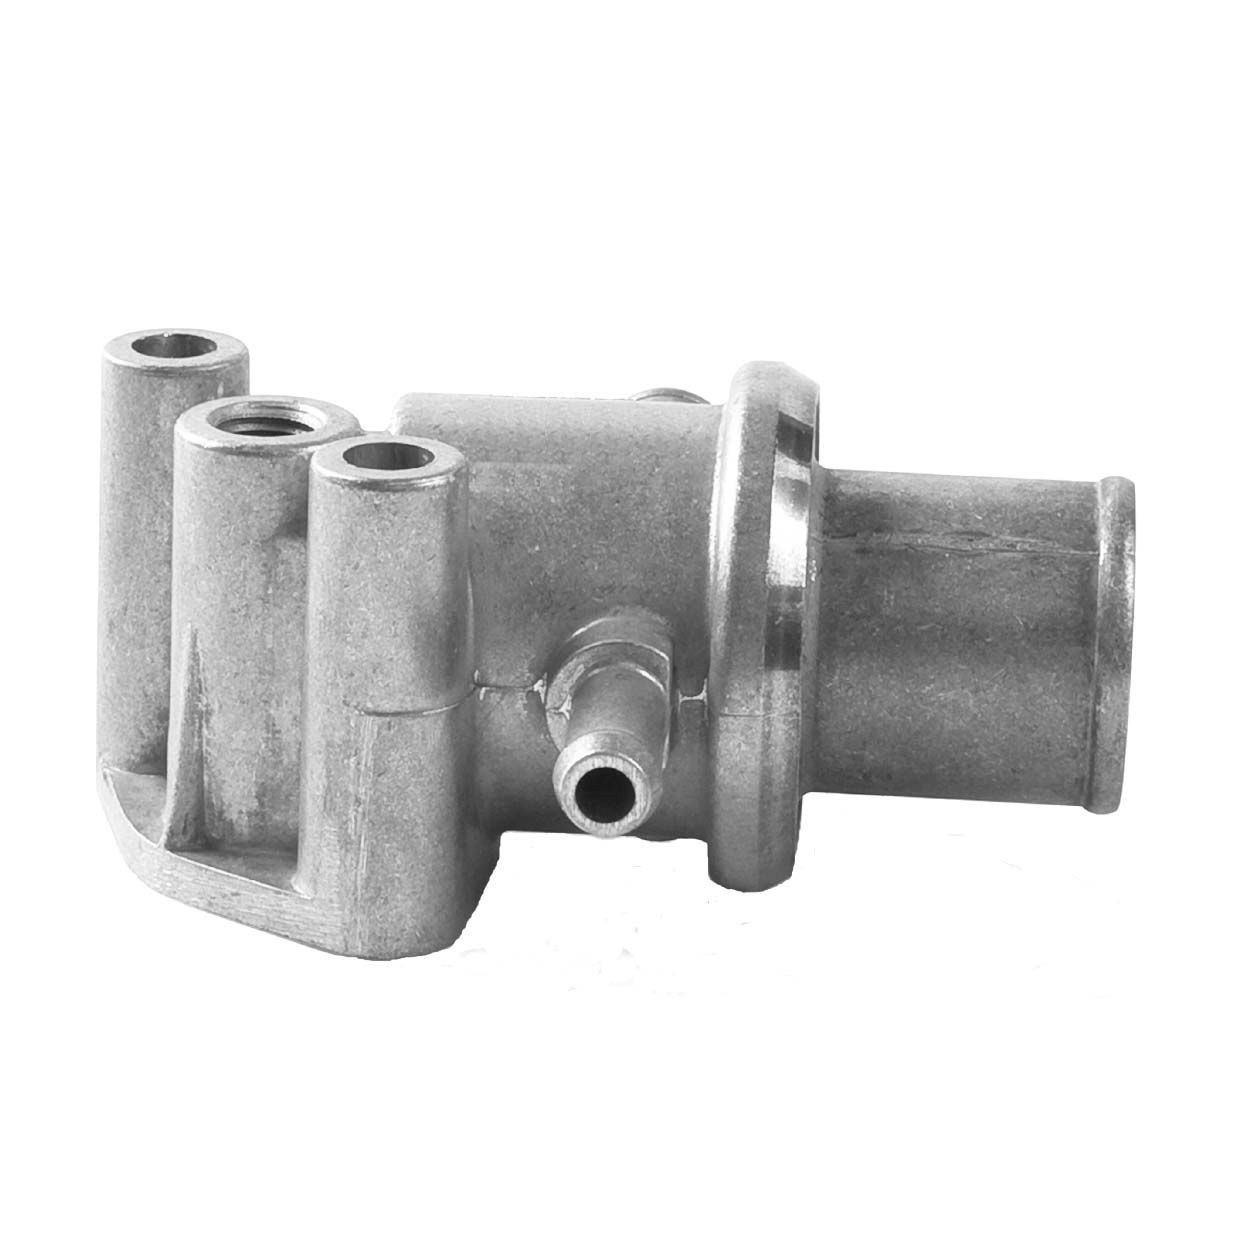 GATES TH16587G1 Engine thermostat Opening Temperature: 87°C, with gaskets/seals, with housing